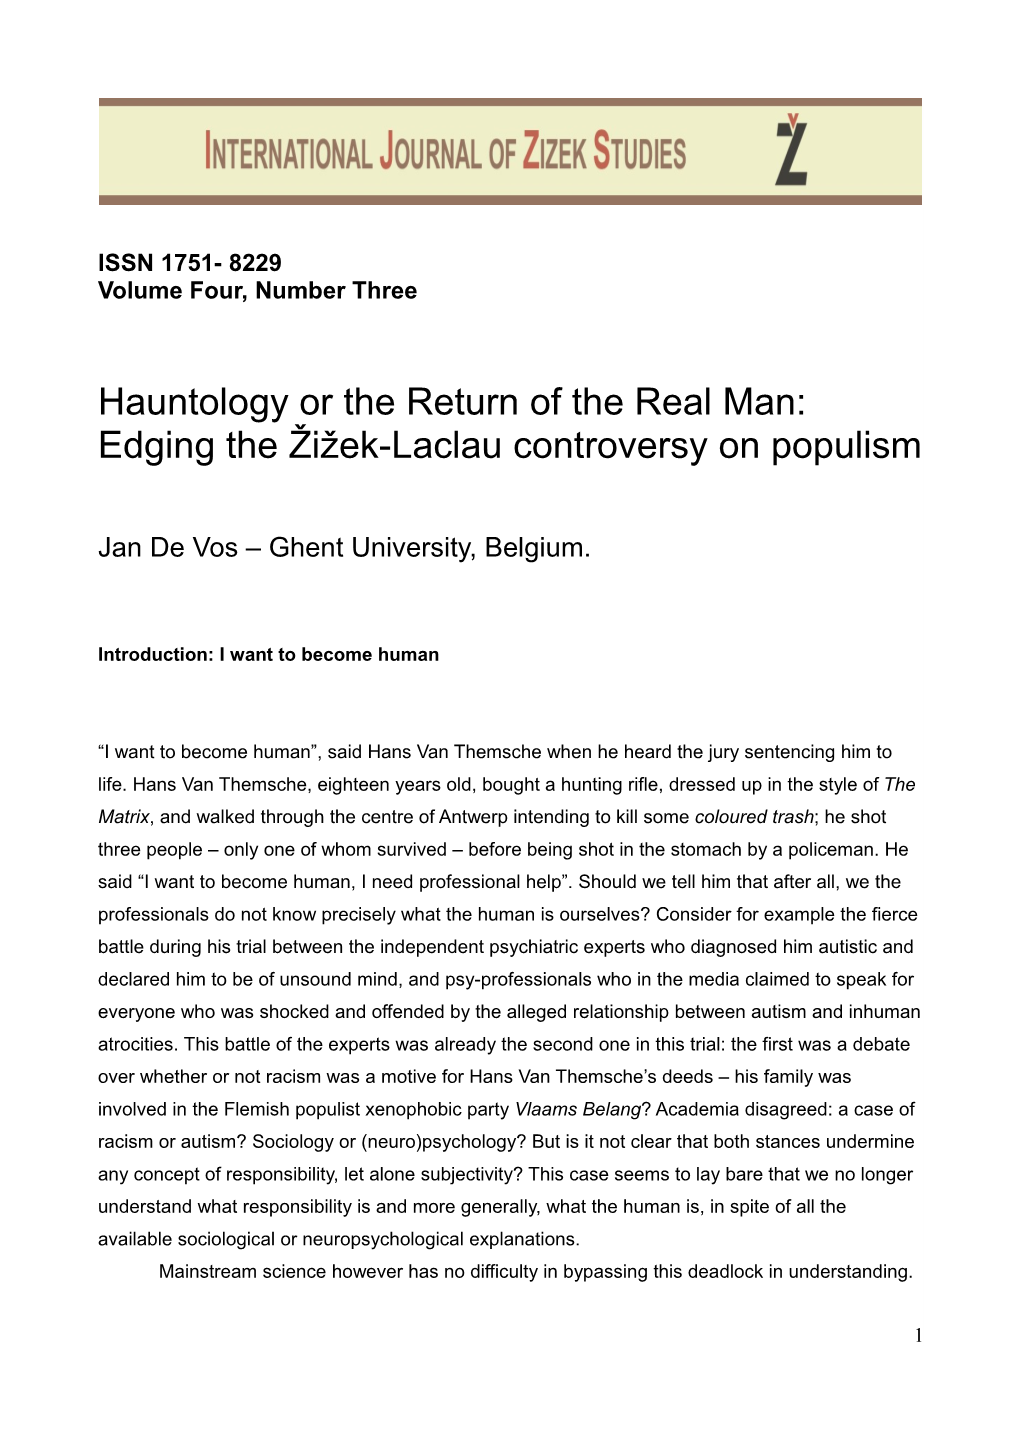 Hauntology Or the Return of the Real Man: Edging the Žižek-Laclau Controversy on Populism